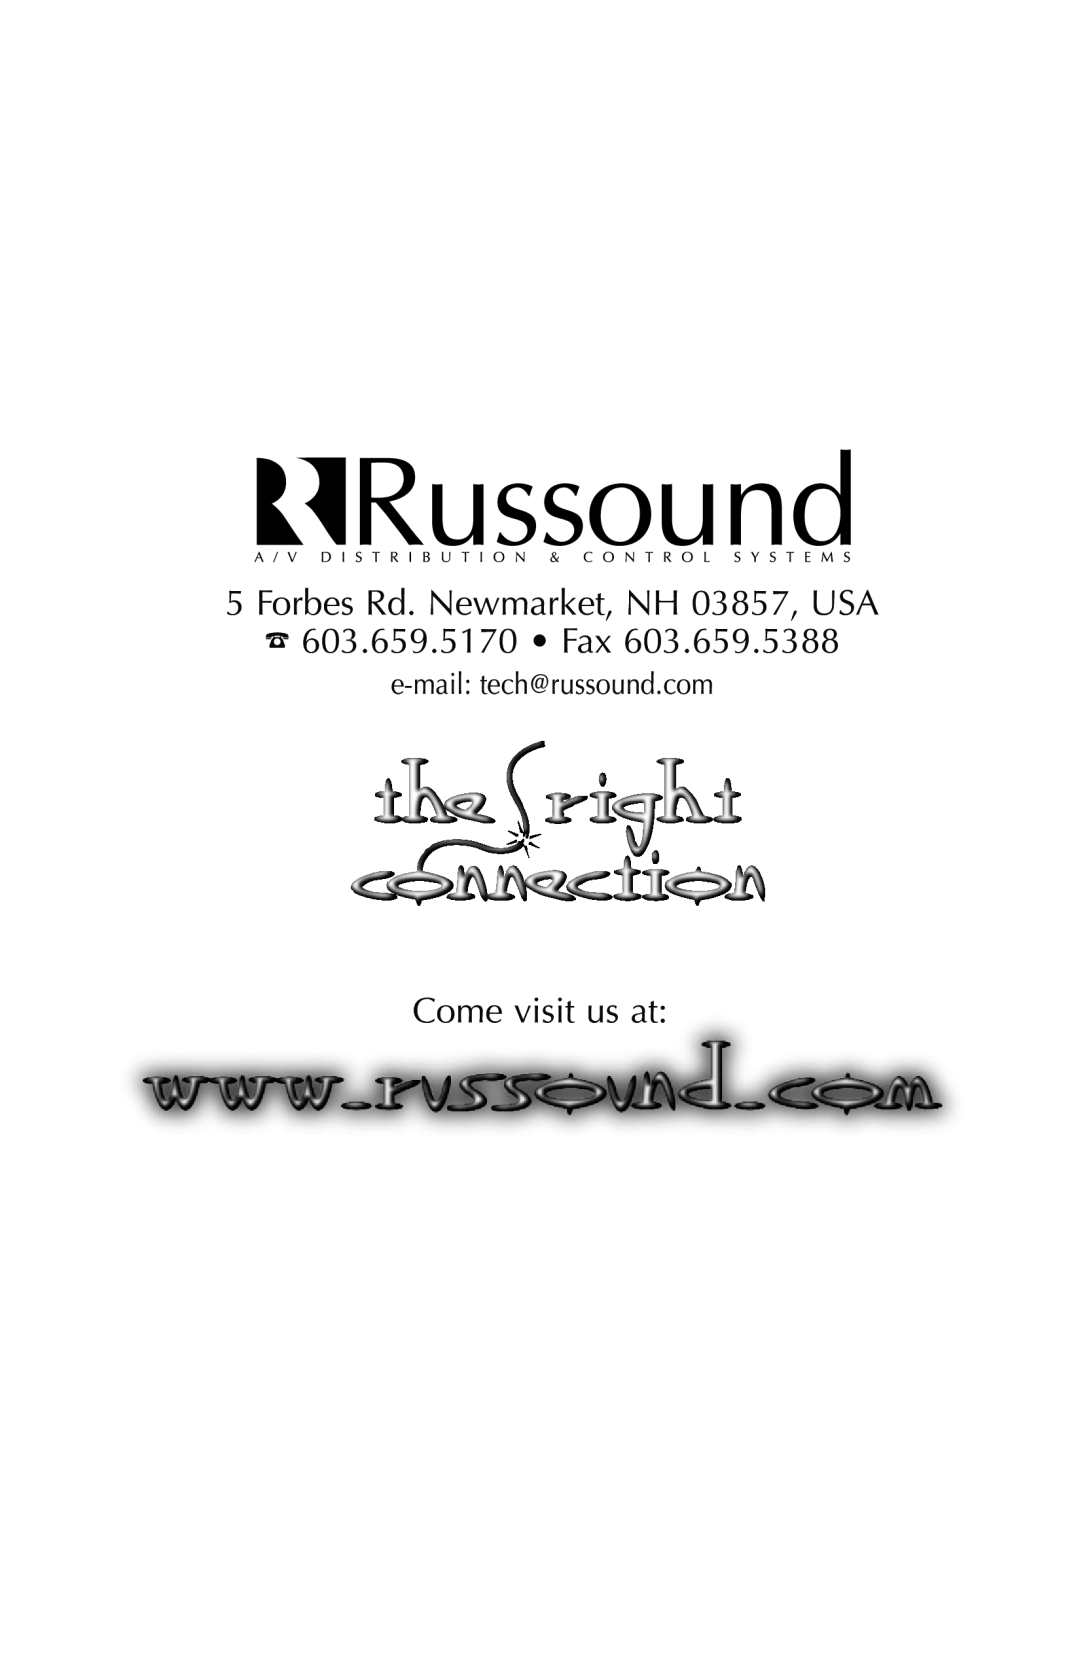 Russound DPA-1.2 instruction manual Forbes Rd. Newmarket, NH 03857, USA, 603.659.5170 Fax, Come visit us at 